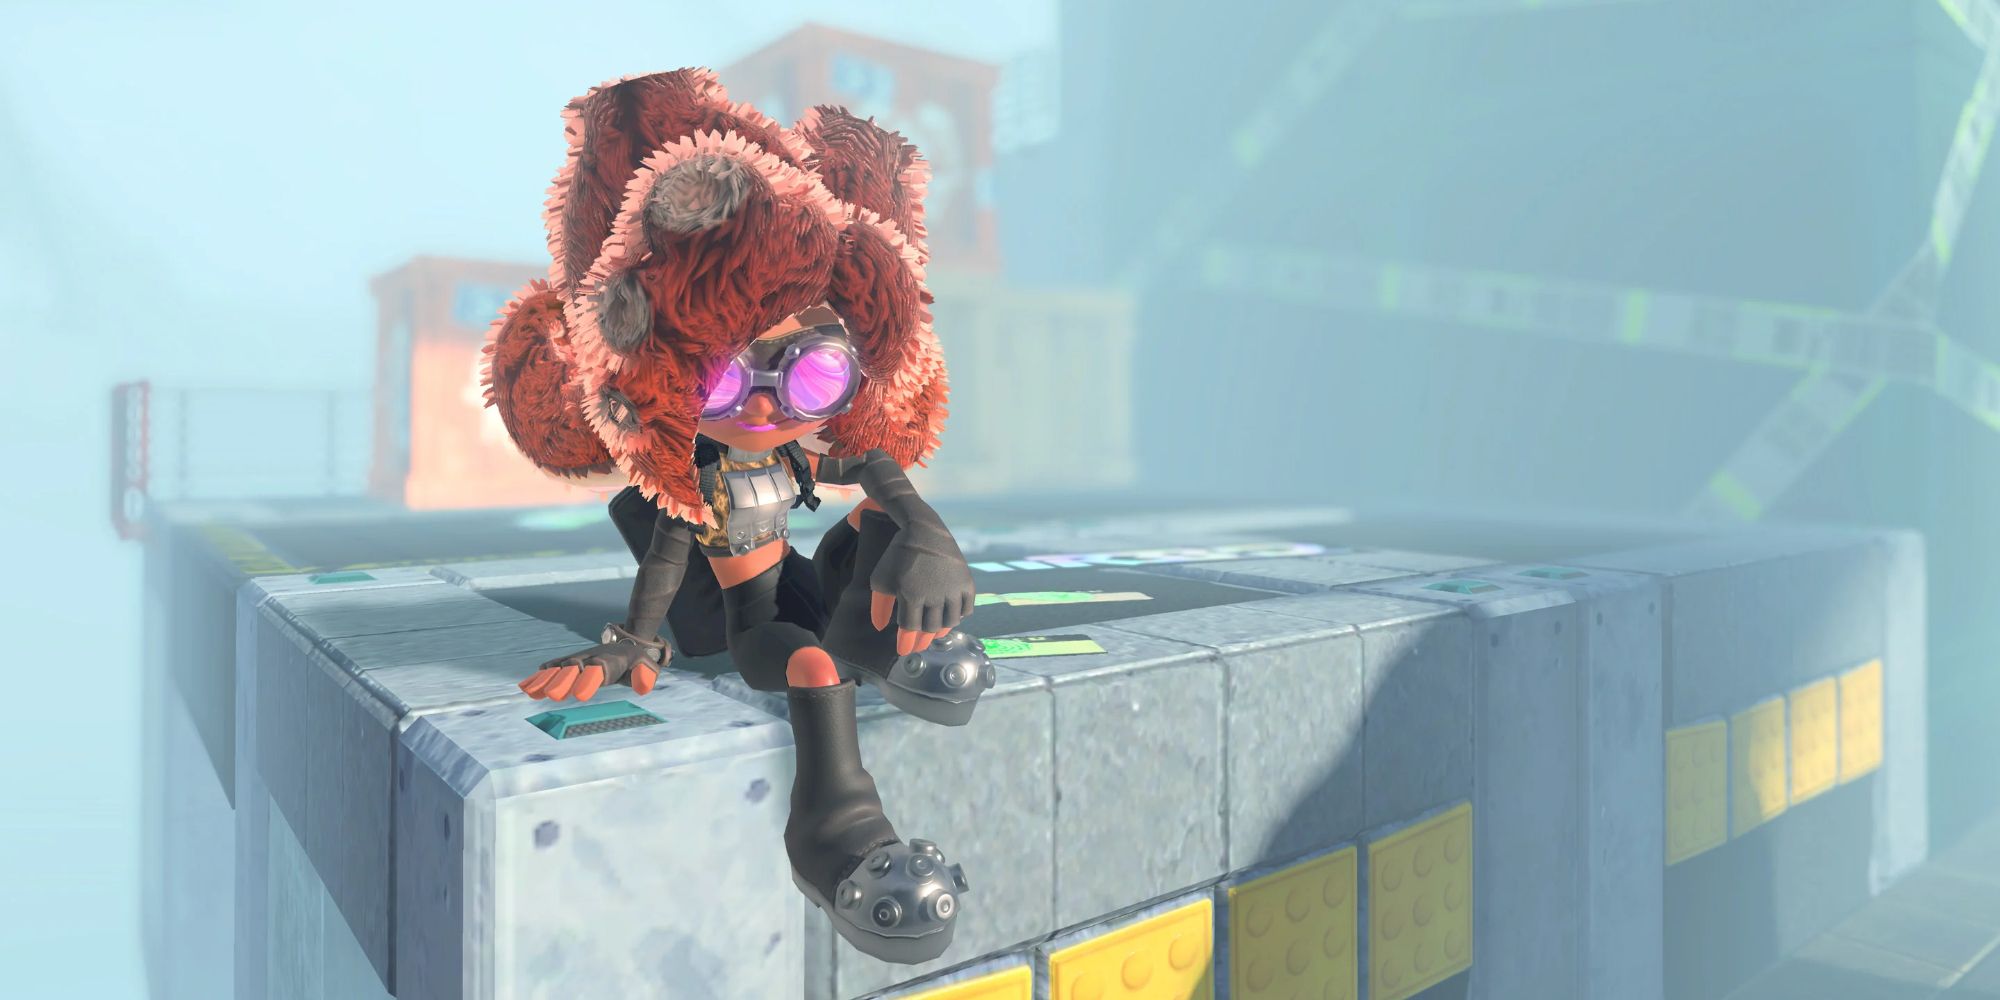 An octoling sits on top of a building